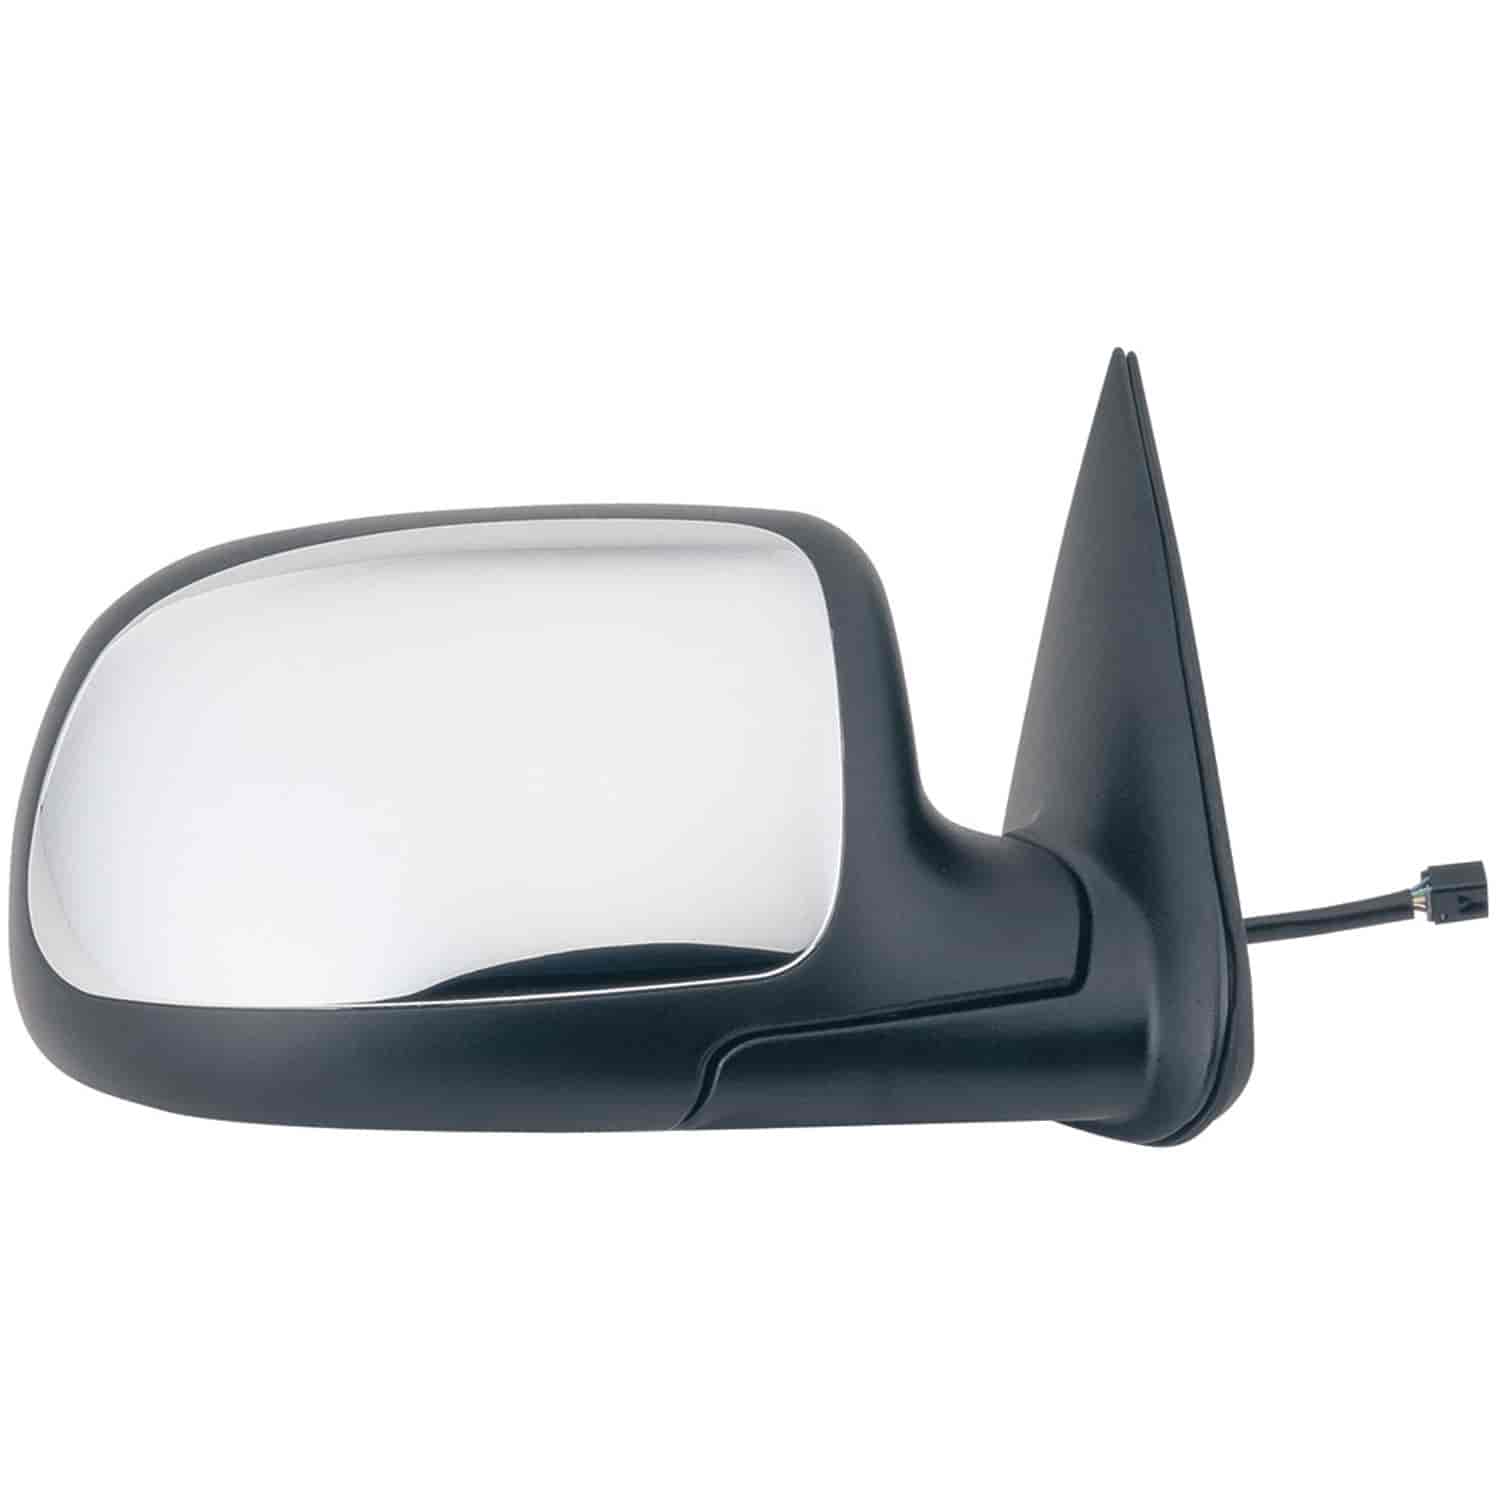 OEM Style Replacement Mirror for Select 1999-2002 Cadillac, Chevrolet & GMC Full Size Trucks